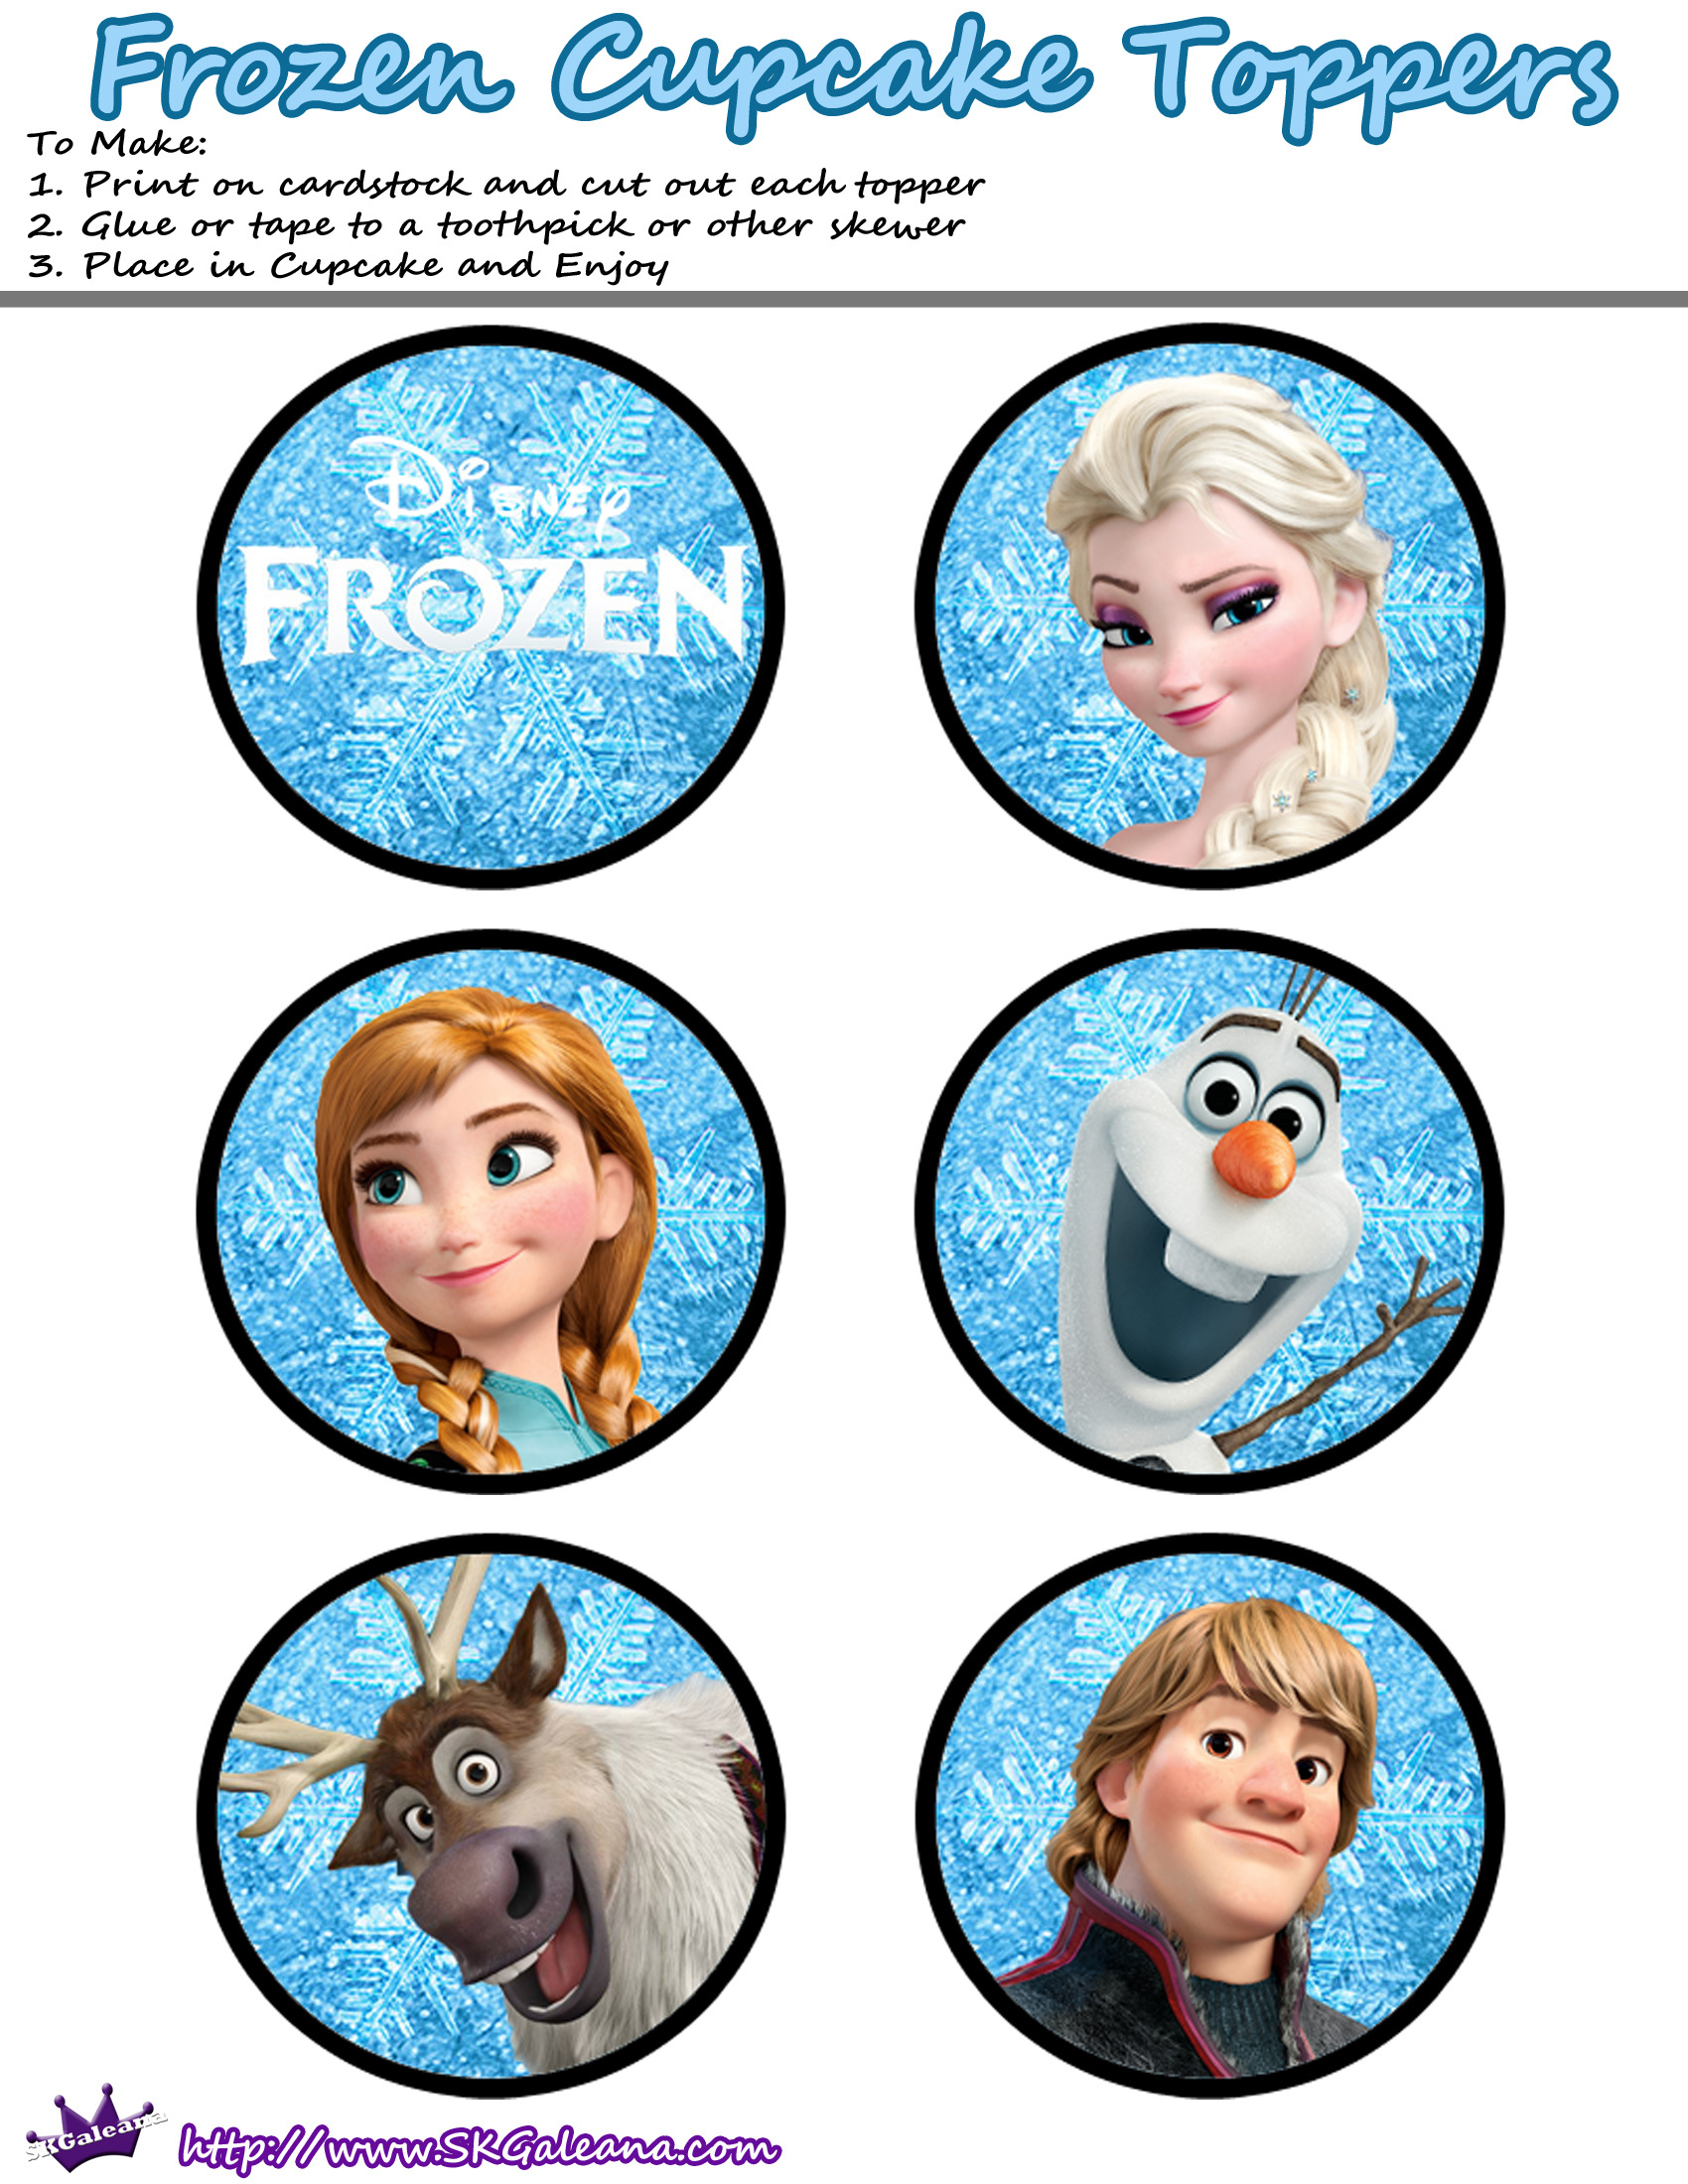 Free Printables For The Disney Movie Frozen | Cake Decorating - Frozen Cupcake Toppers Free Printable